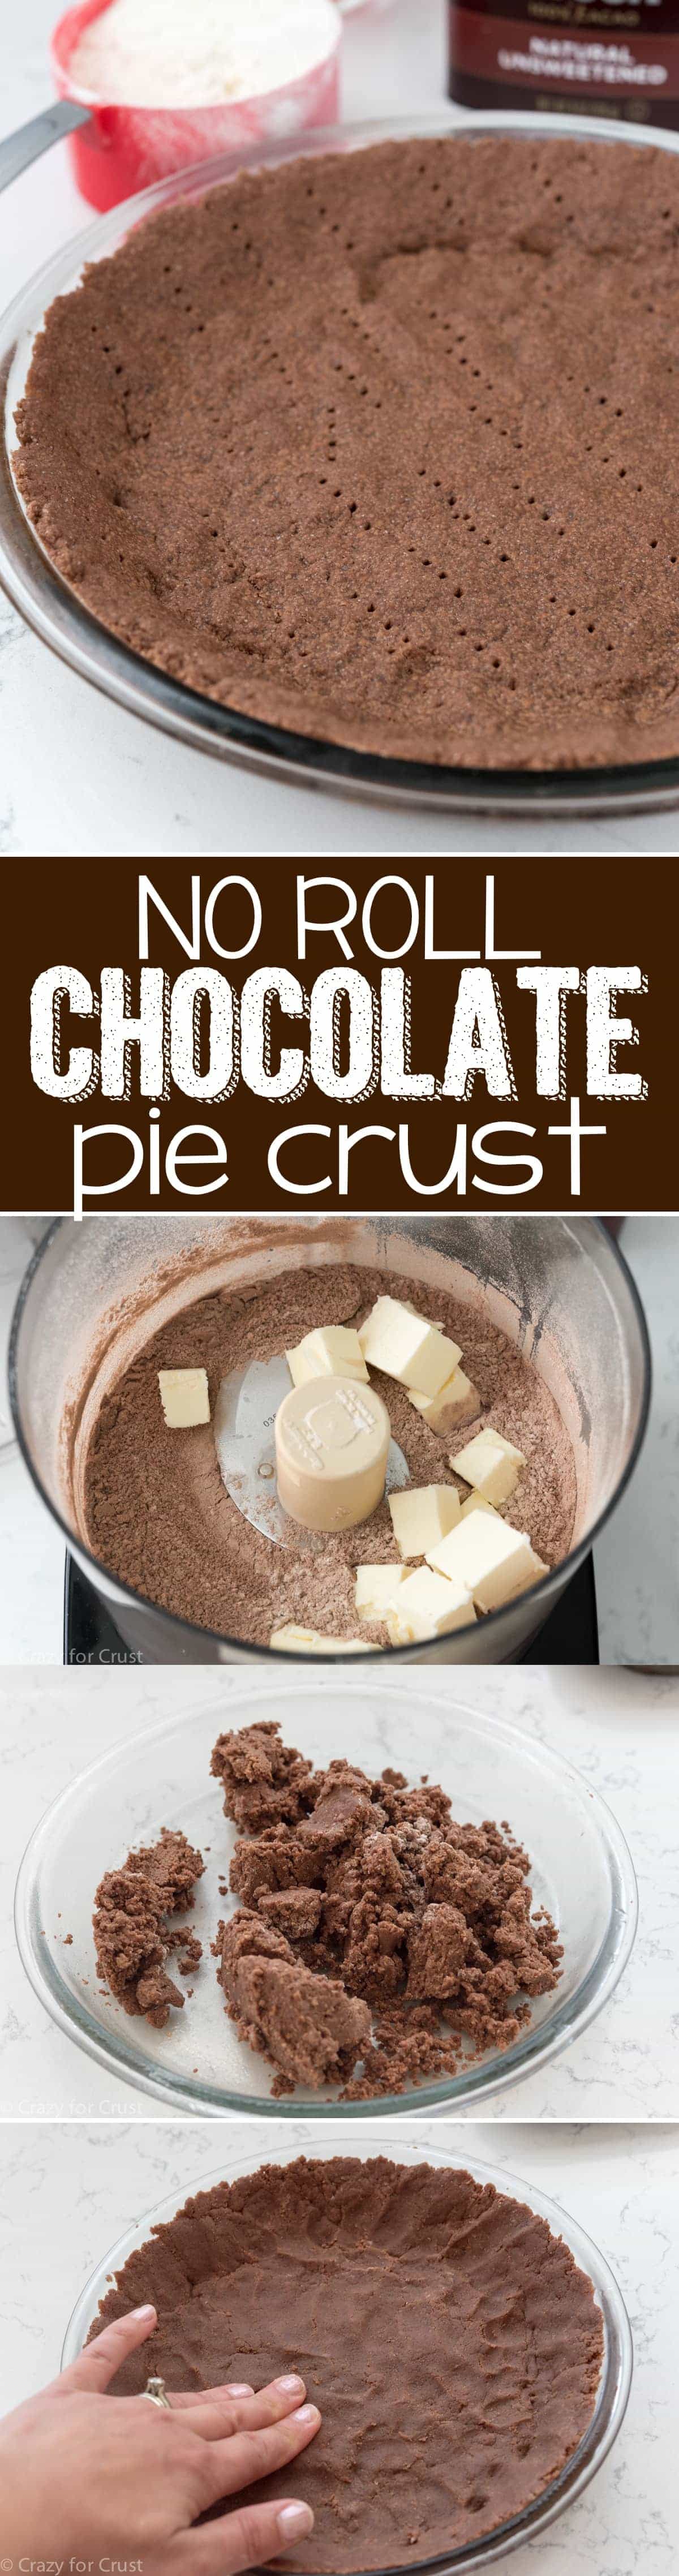 No Roll Chocolate Pie Crust - an easy pie crust recipe that's CHOCOLATE! Just mix it up in a food processor and press it into the pan , no rolling! It's great for baked or filled pies!